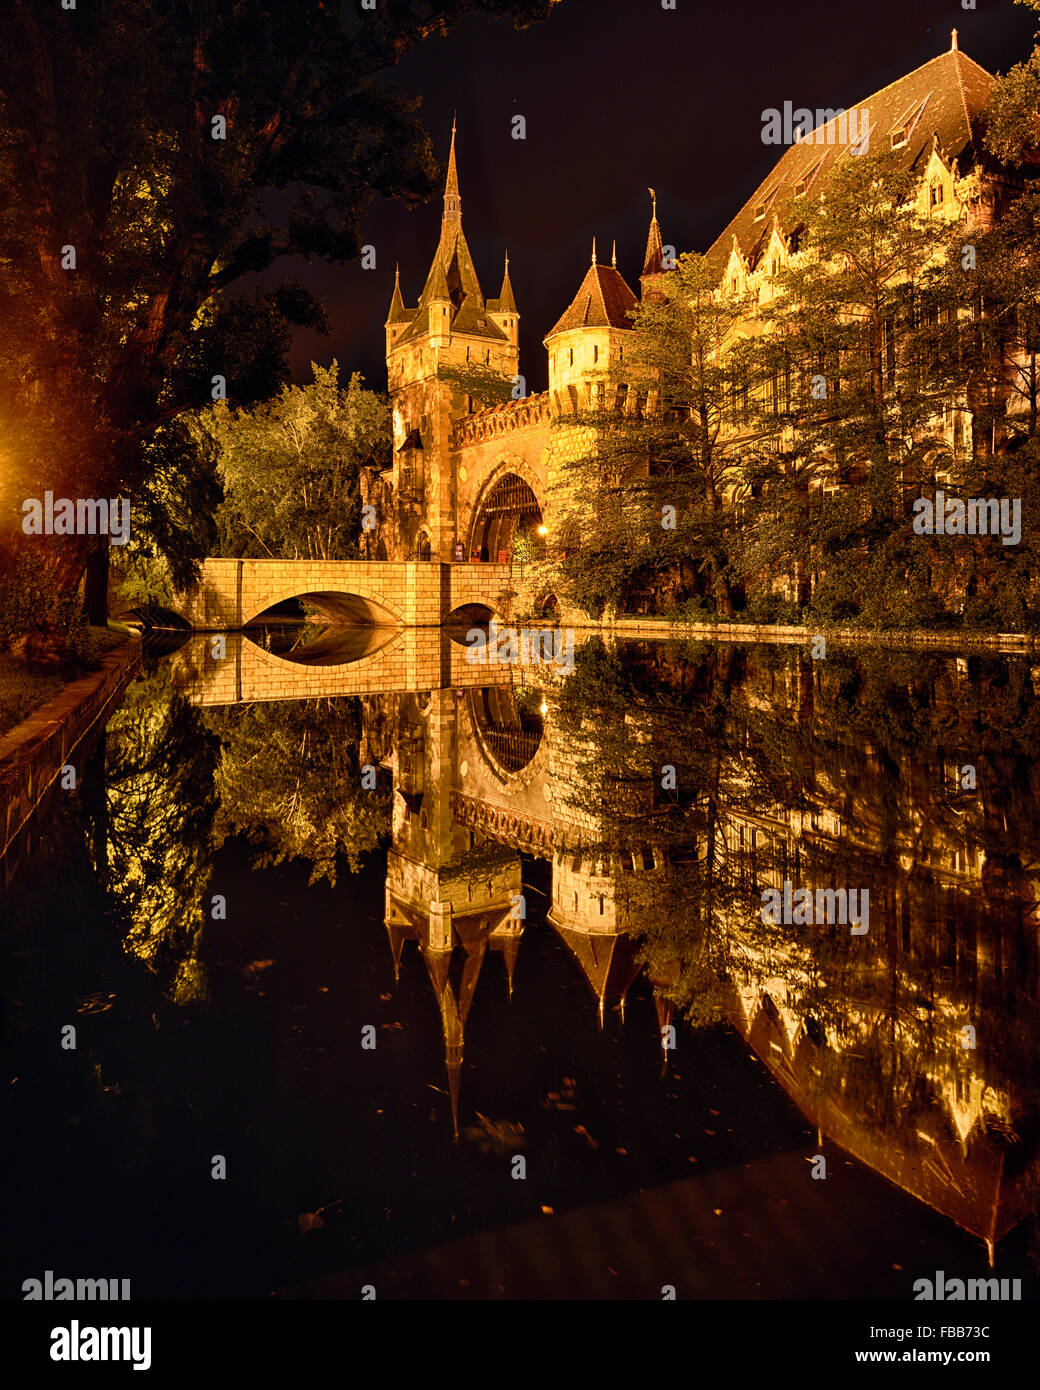 View of the Entrance Gate , Tower and Bridge of the Vajadahunyad Castle reflected in a a Lake at Night, Budapest, Hungary Stock Photo